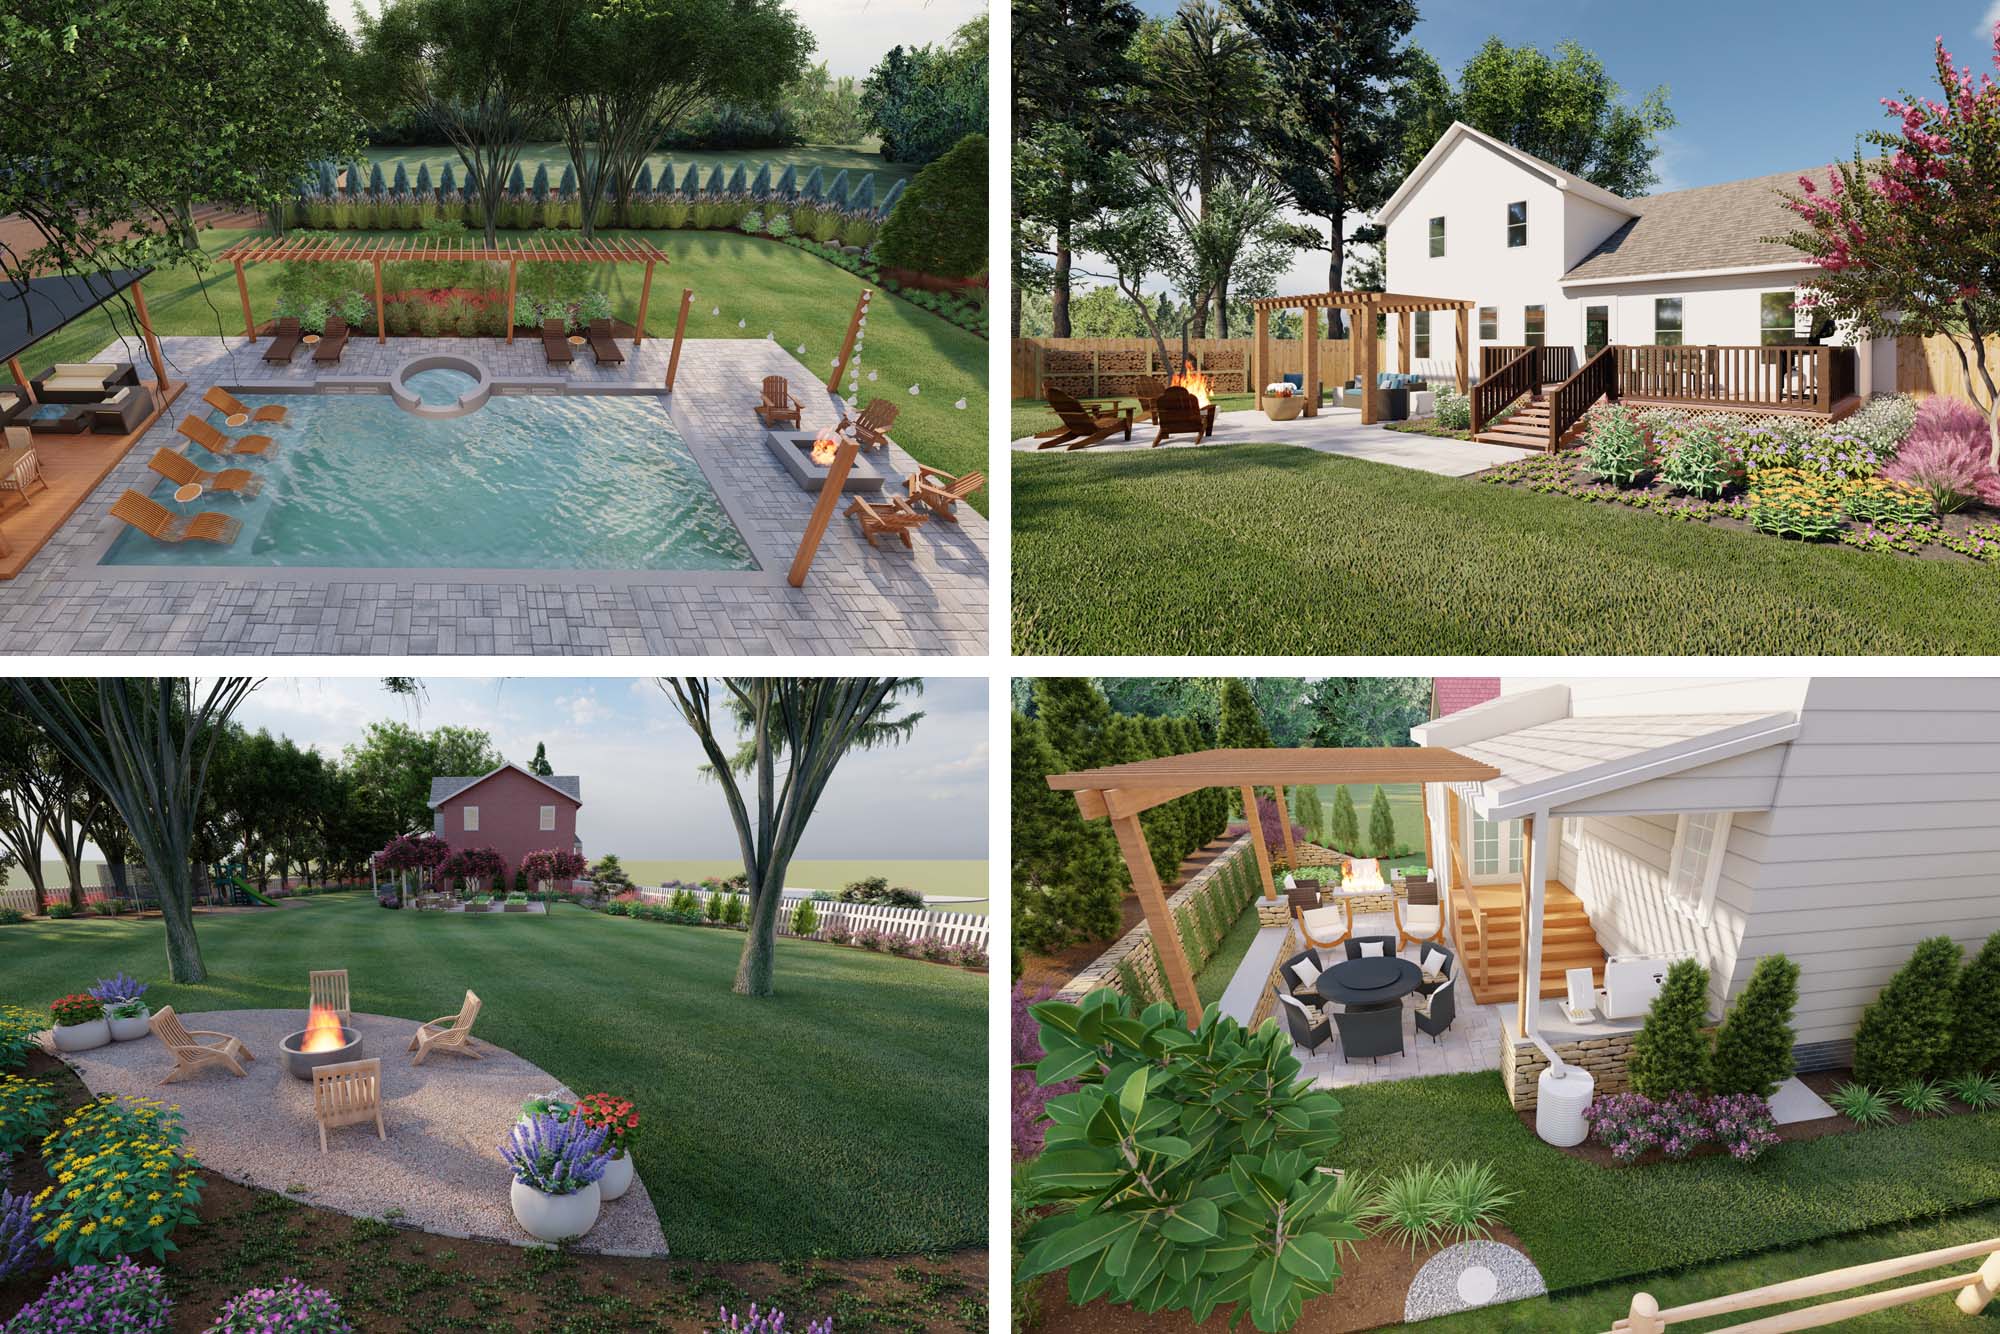 Backyard designs by Tilly.  top left: pool surrounded by grey blocks, top right: backyard patio with a fire pit and lounge chairs, bottom left: petal shaped stone patio with a fire pit, four lounge chairs, and flowers in big pots, bottom right: small backyard with a patio and round table with chairs